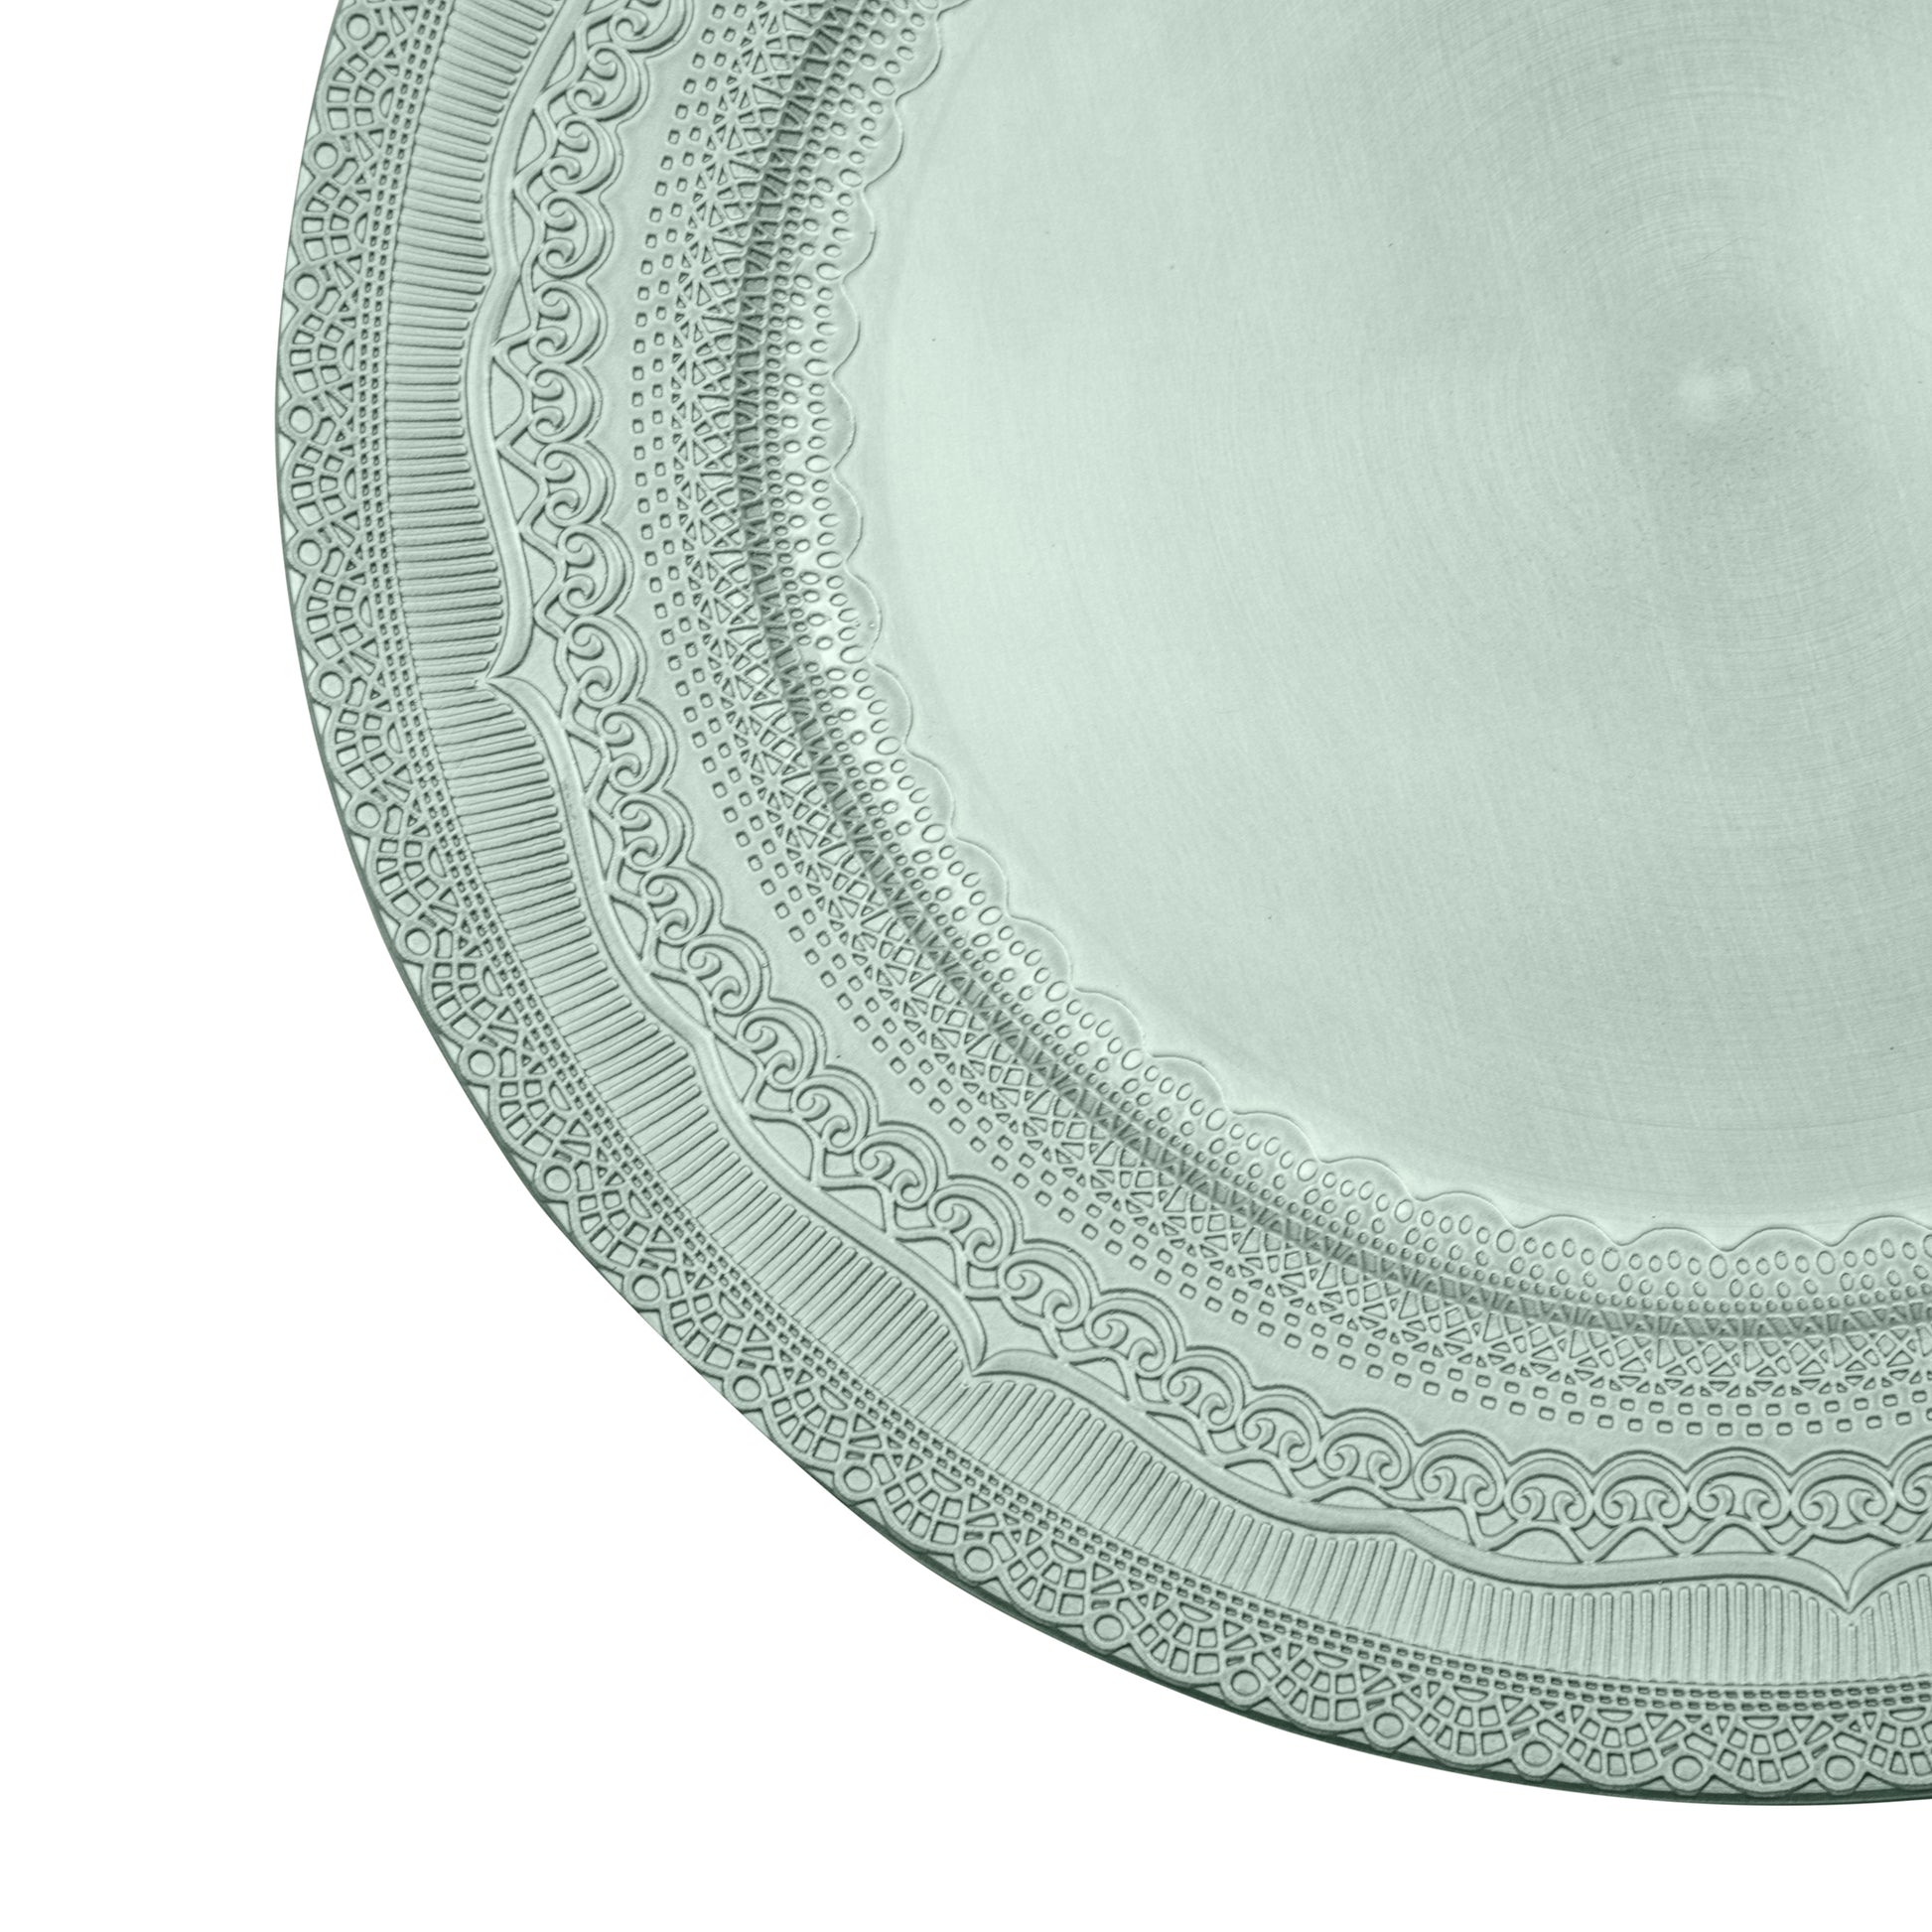 Lace Embossed Acrylic Plastic Charger Plate - Light Turquoise